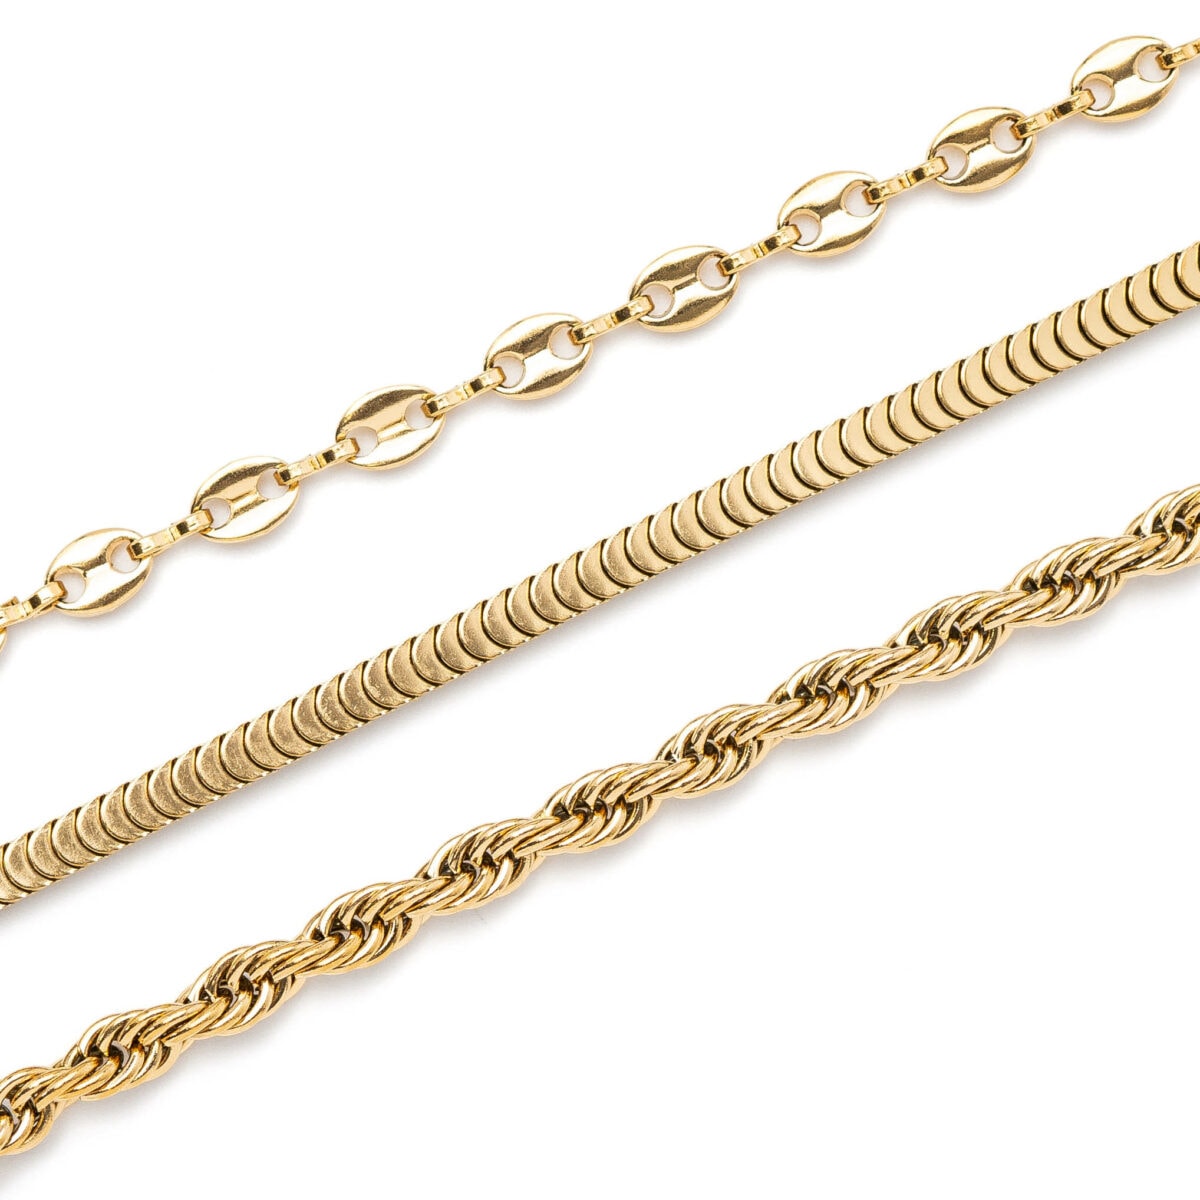 https://m.clubbella.co/product/bold-gold-rope-chain-bracelet/ Resized (29 of 134)